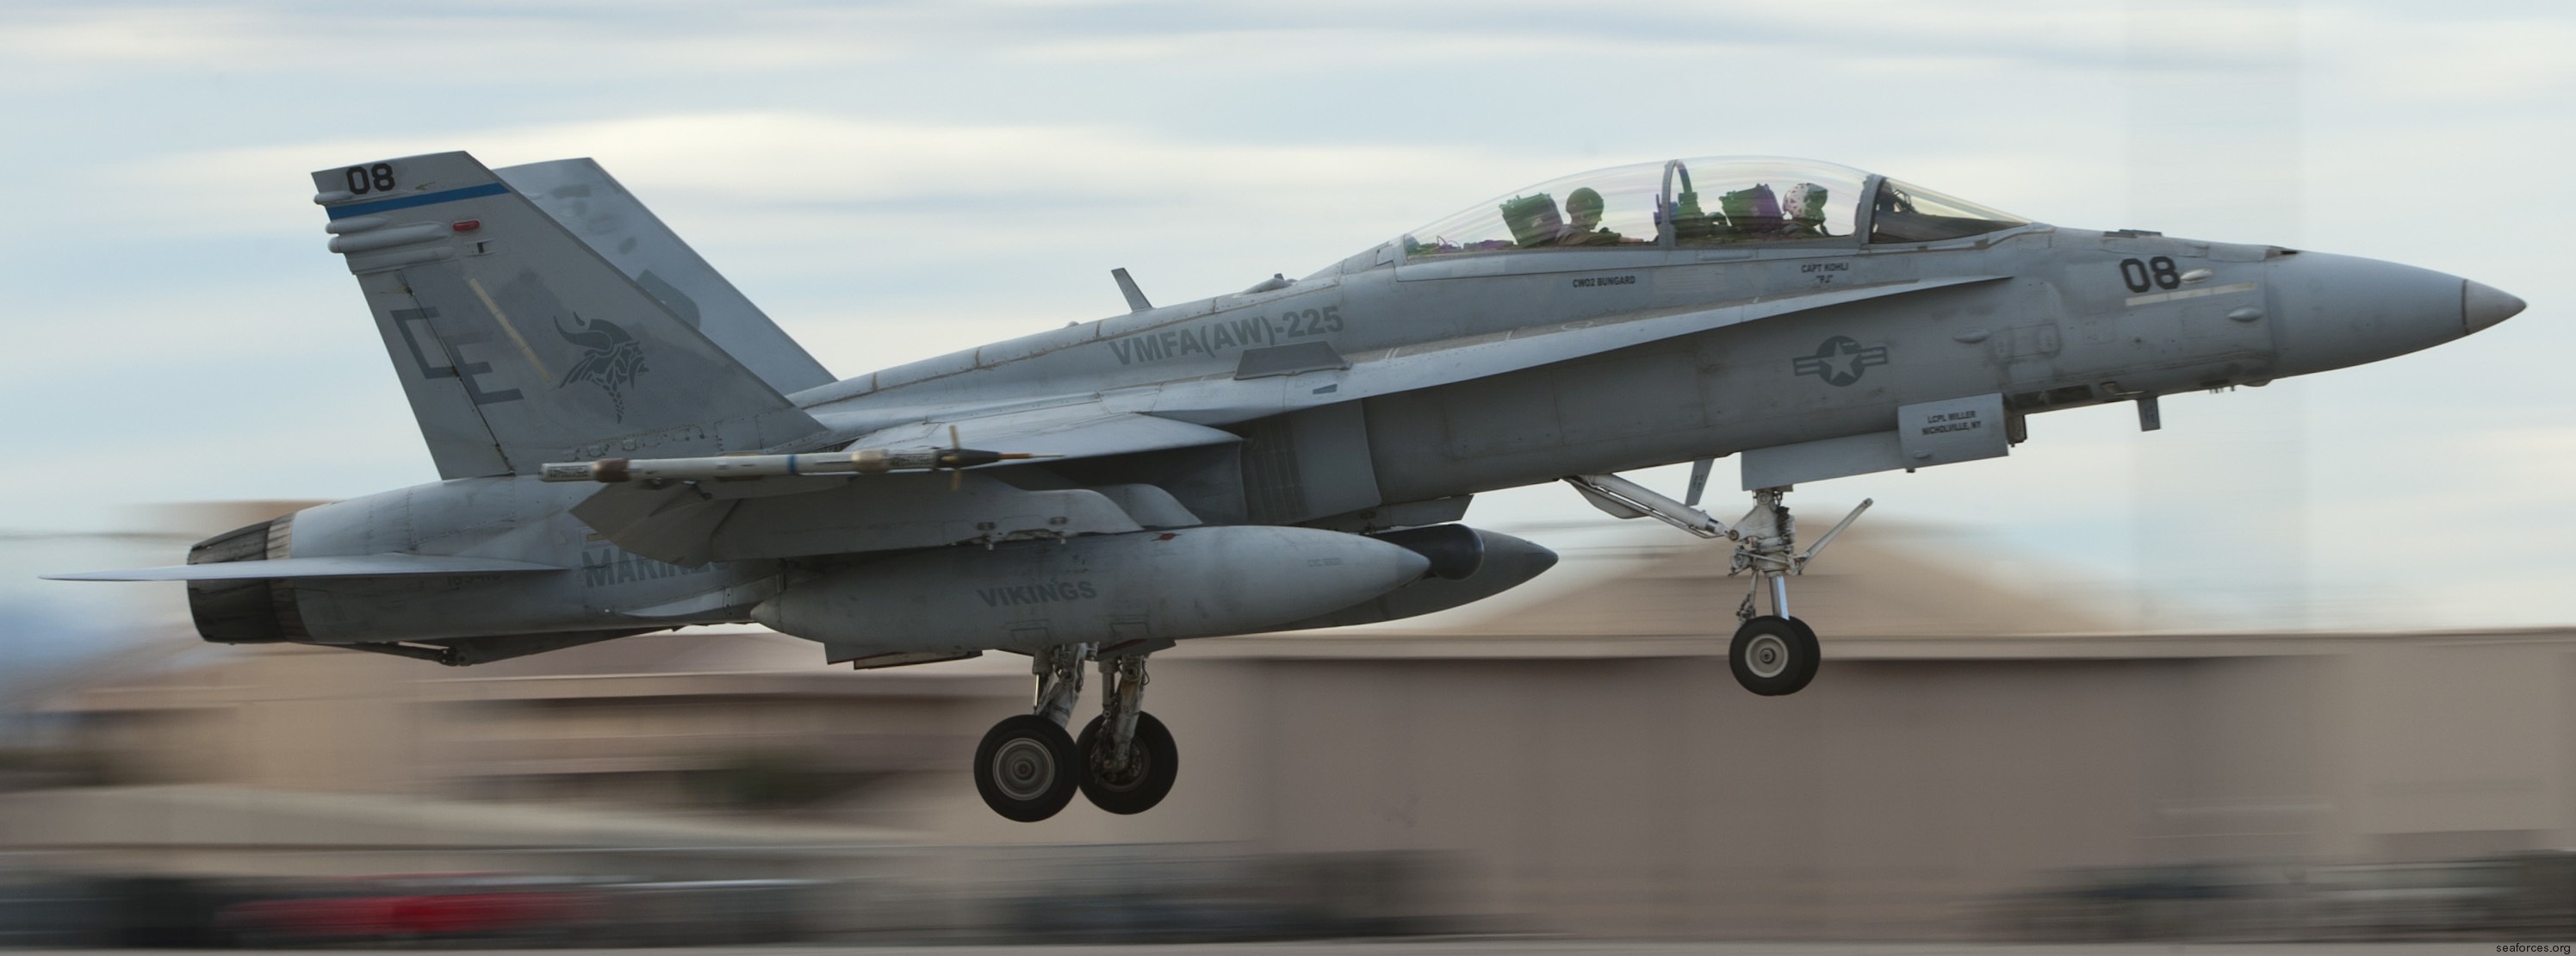 vmfa(aw)-225 vikings marine fighter attack squadron f/a-18d hornet 36 exercise red flag nellis afb nevada